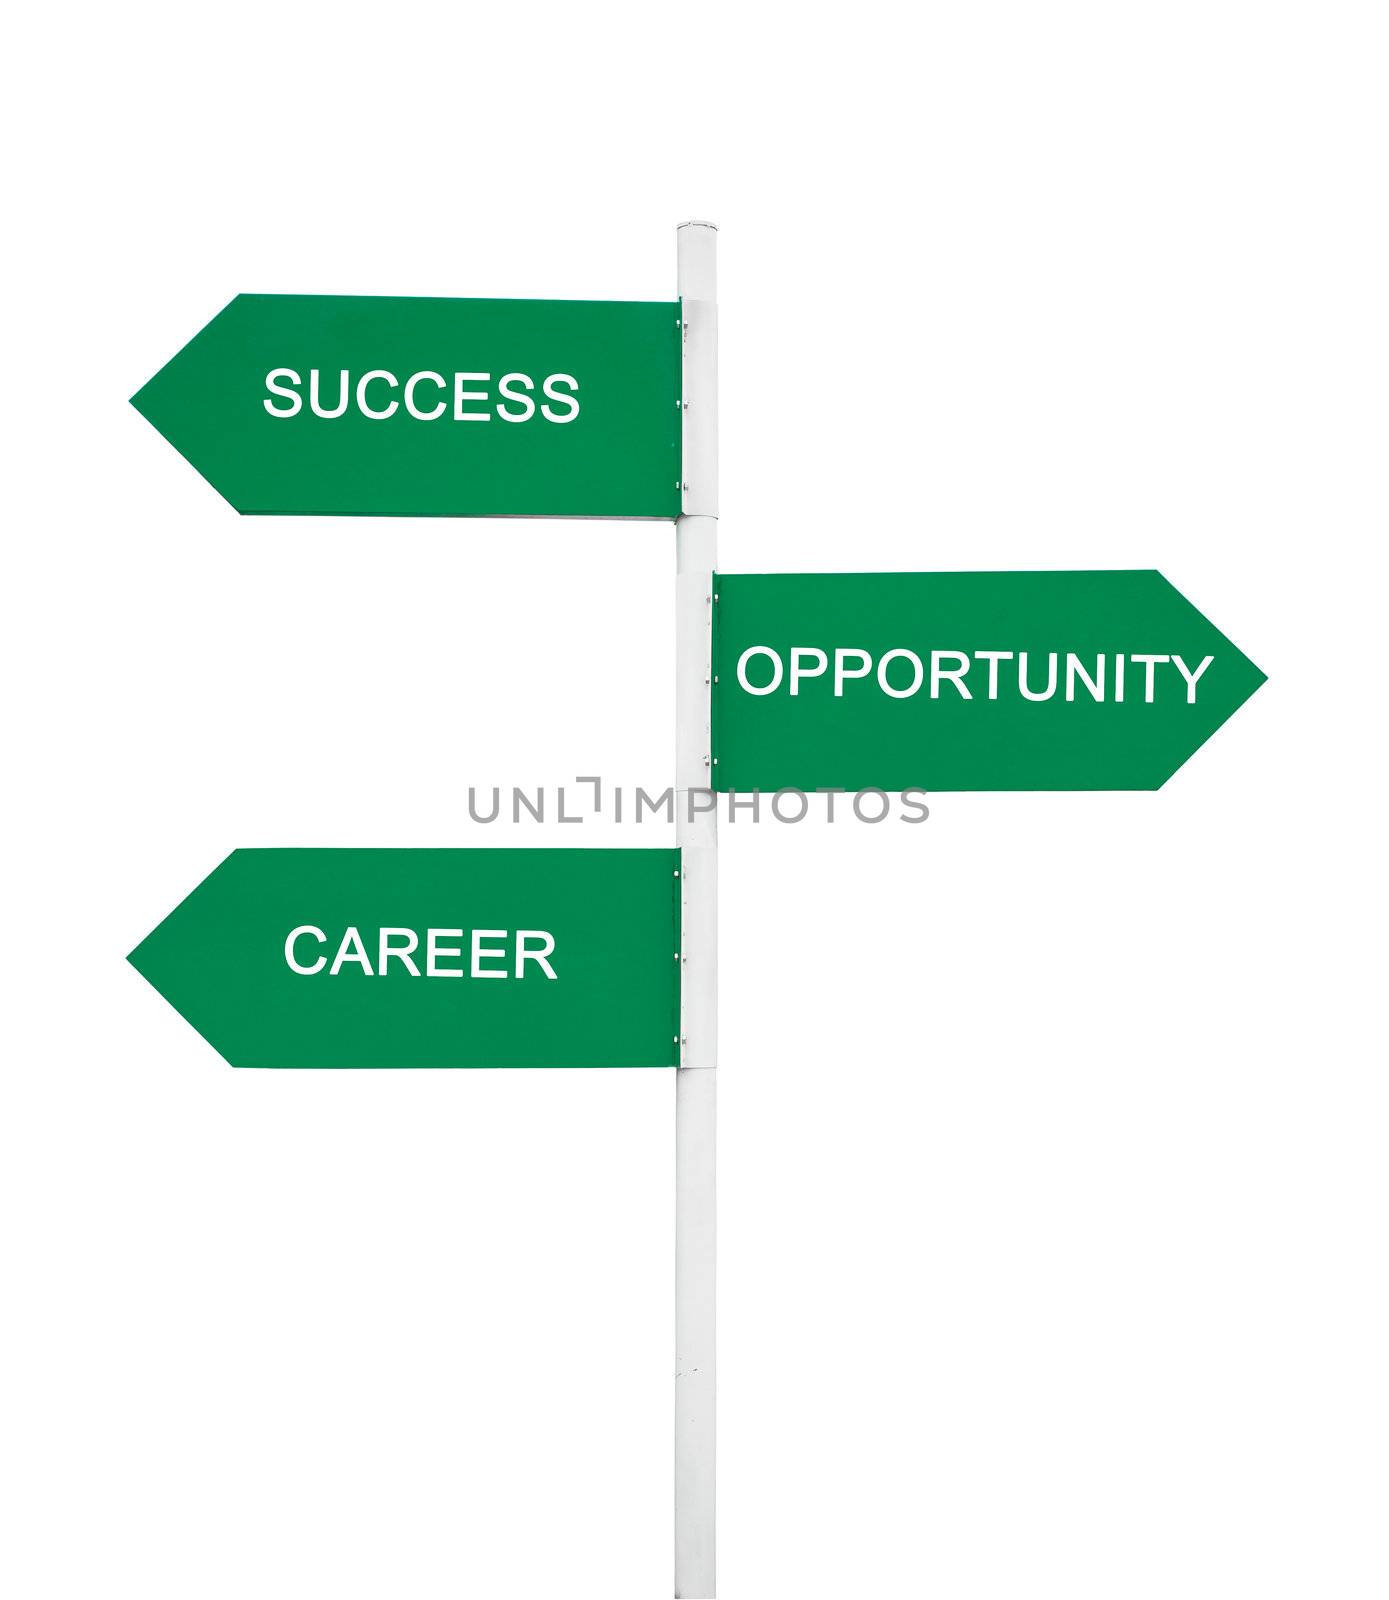 Success concept related words in sign